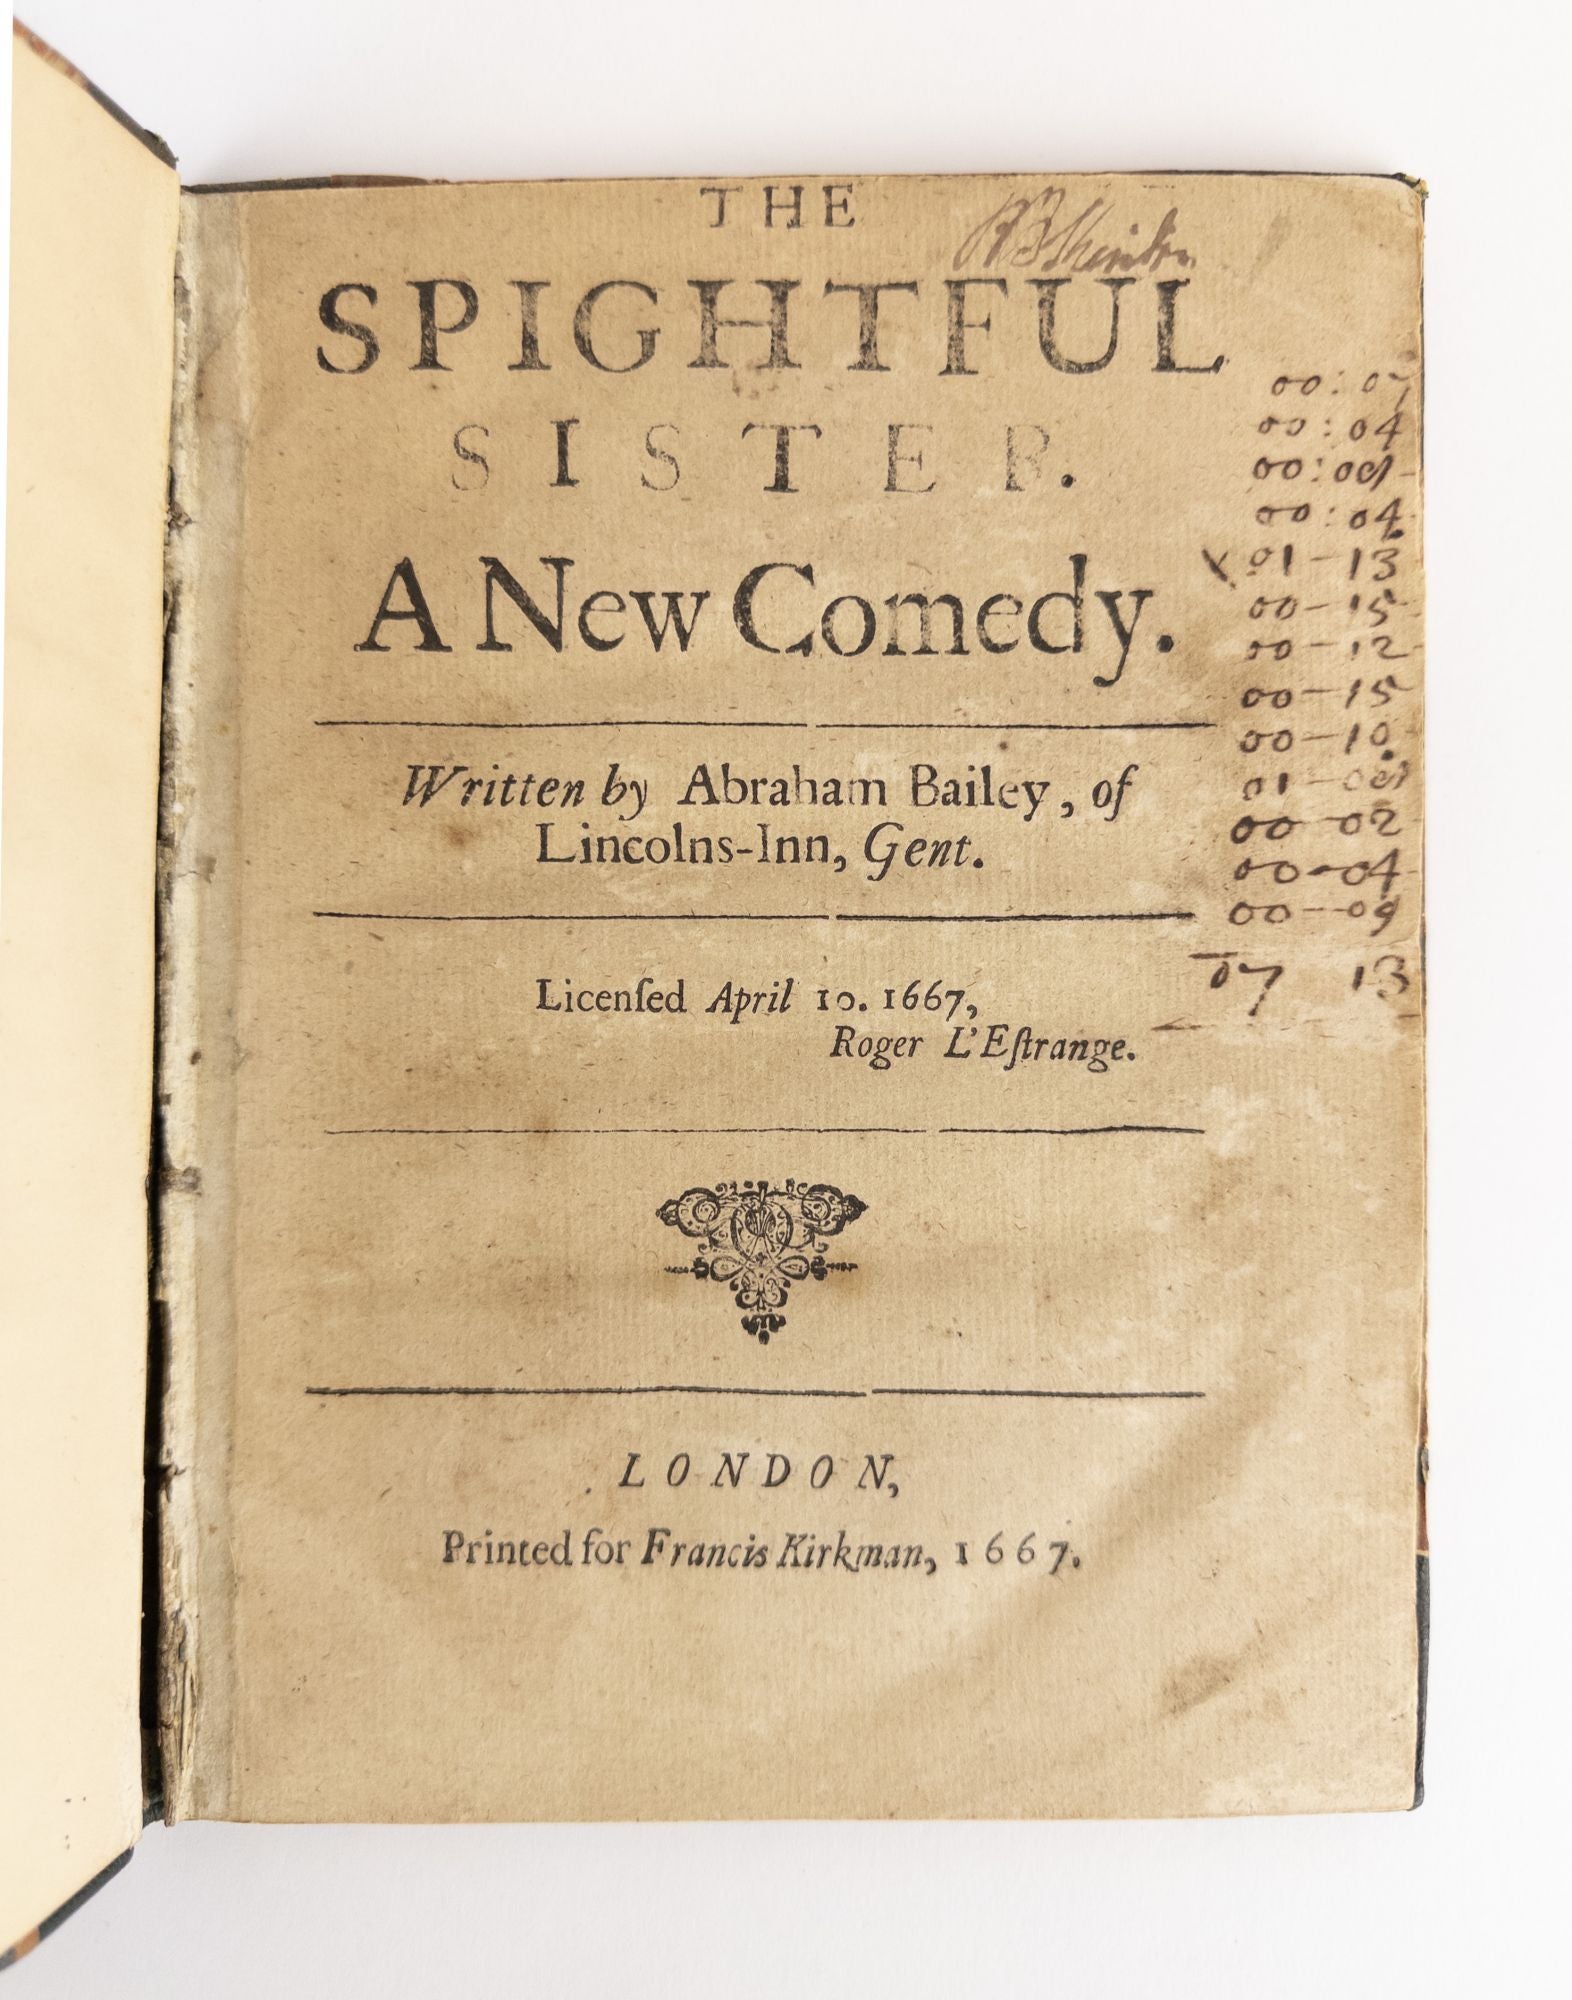 Product Image for THE SPIGHTFUL SISTER [Sheridan's copy]